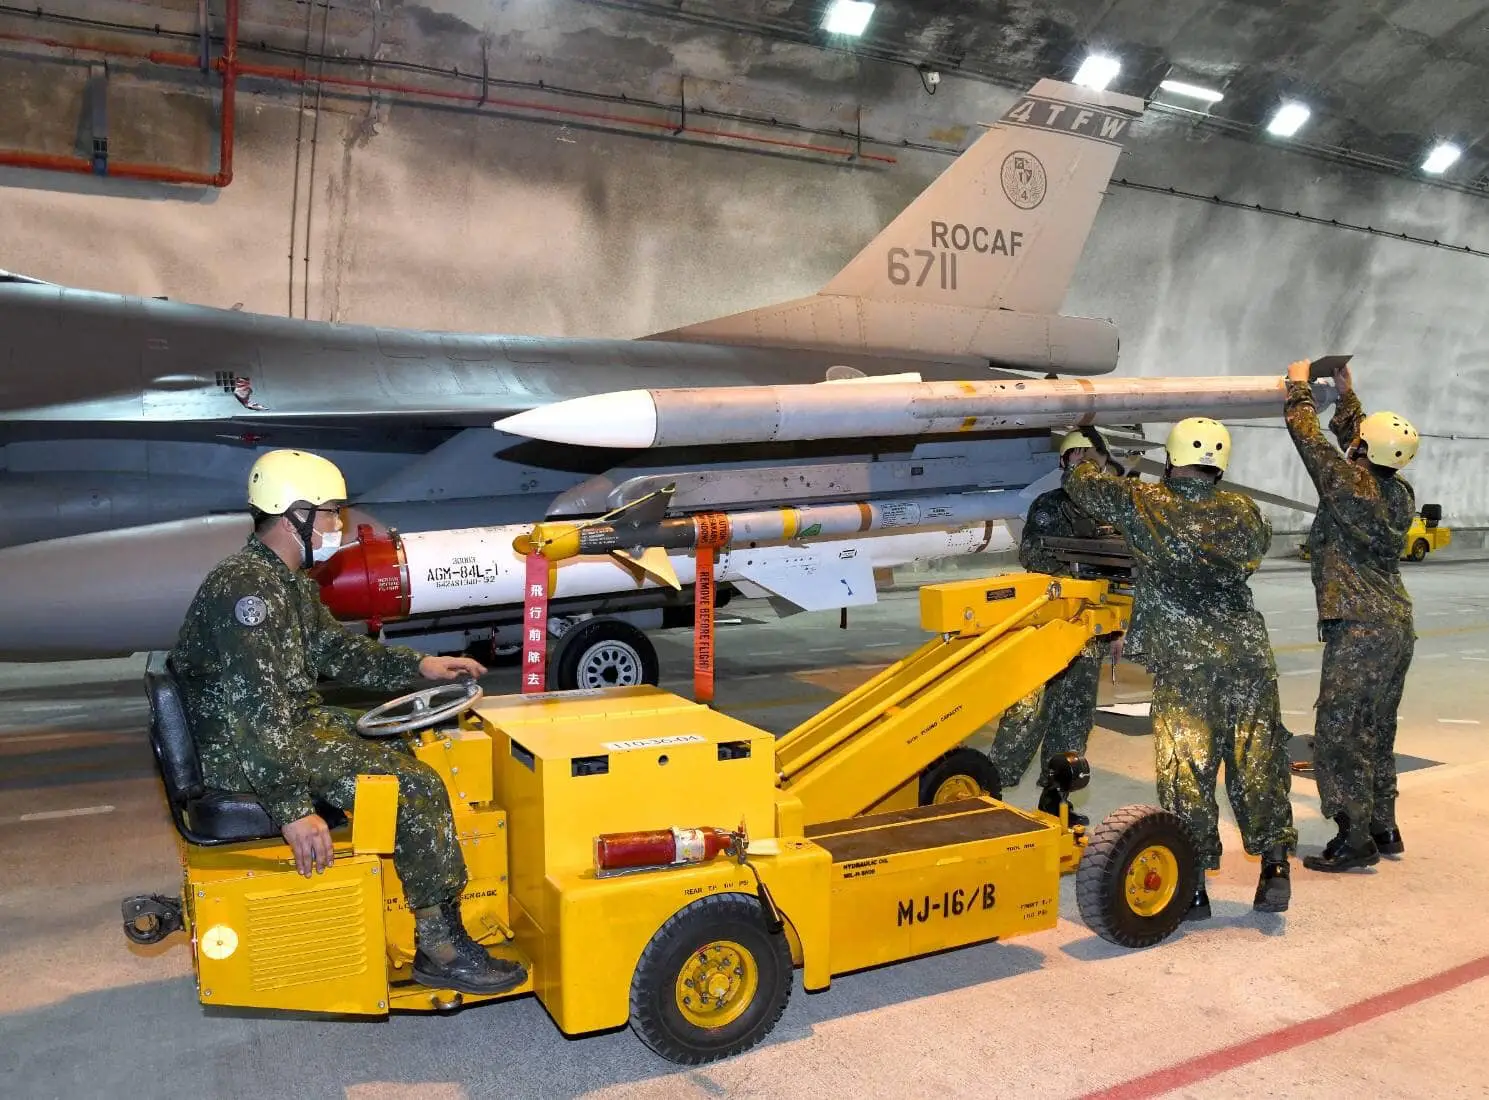 The images show how the military loads an AGM-84L Harpoon anti-ship missile (Credit: ROCAF)